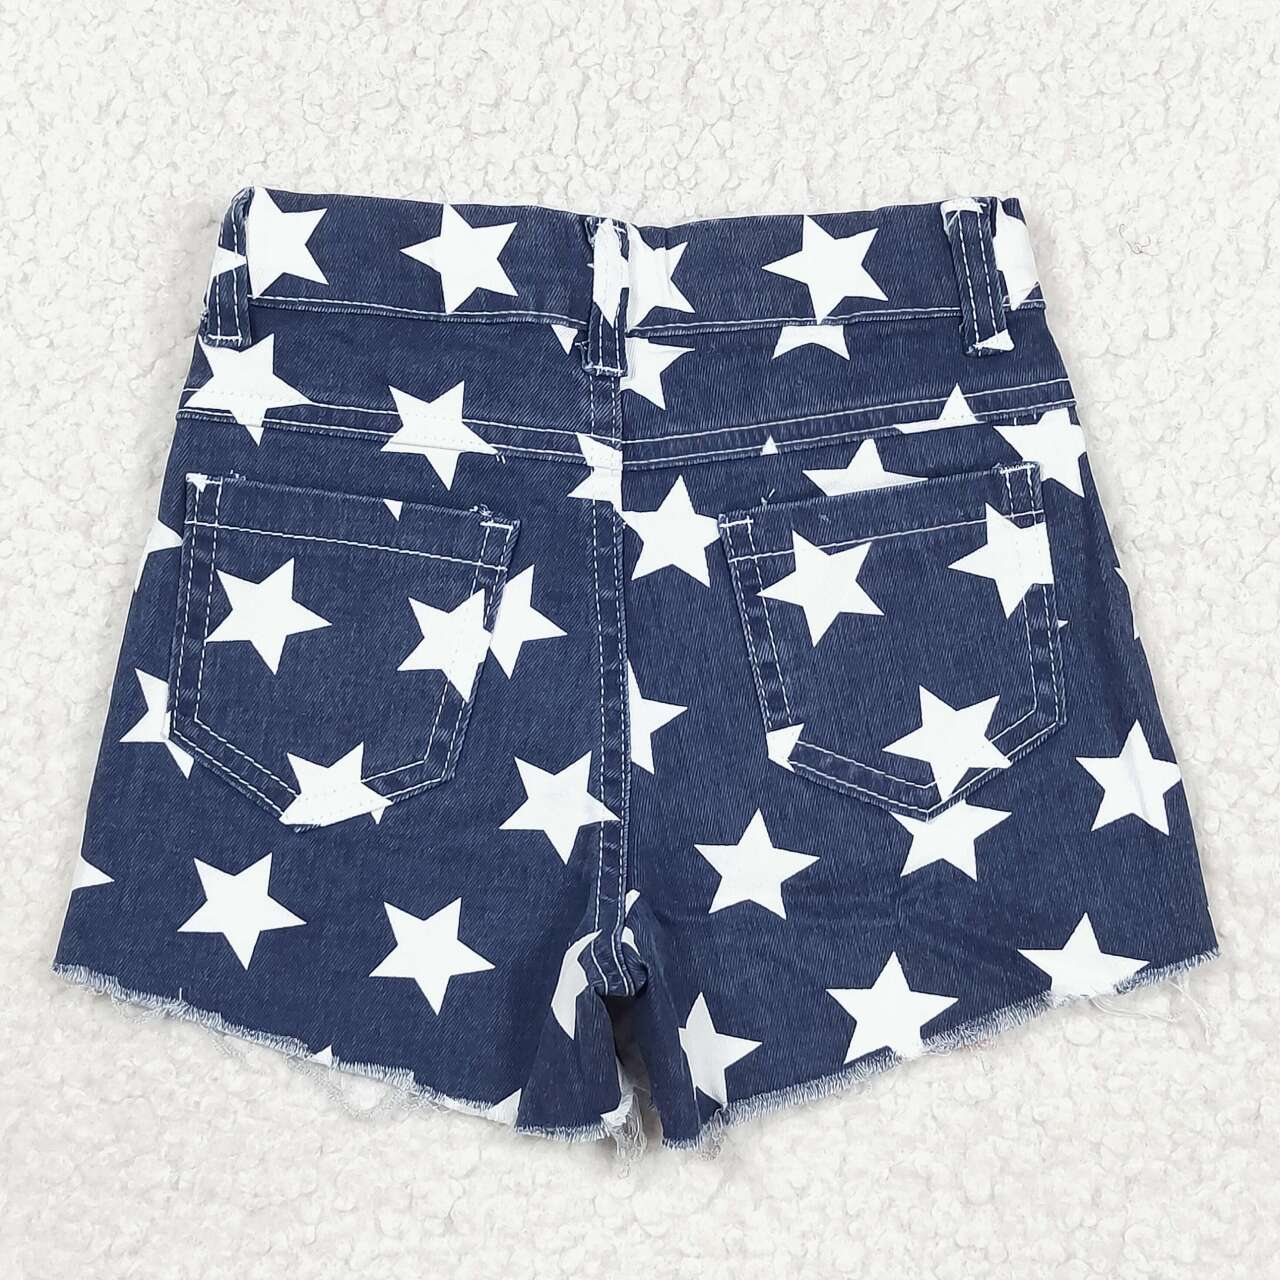 SS0168 Blue Star Red Stripes Denim 4th of July Jeans Girls Shorts